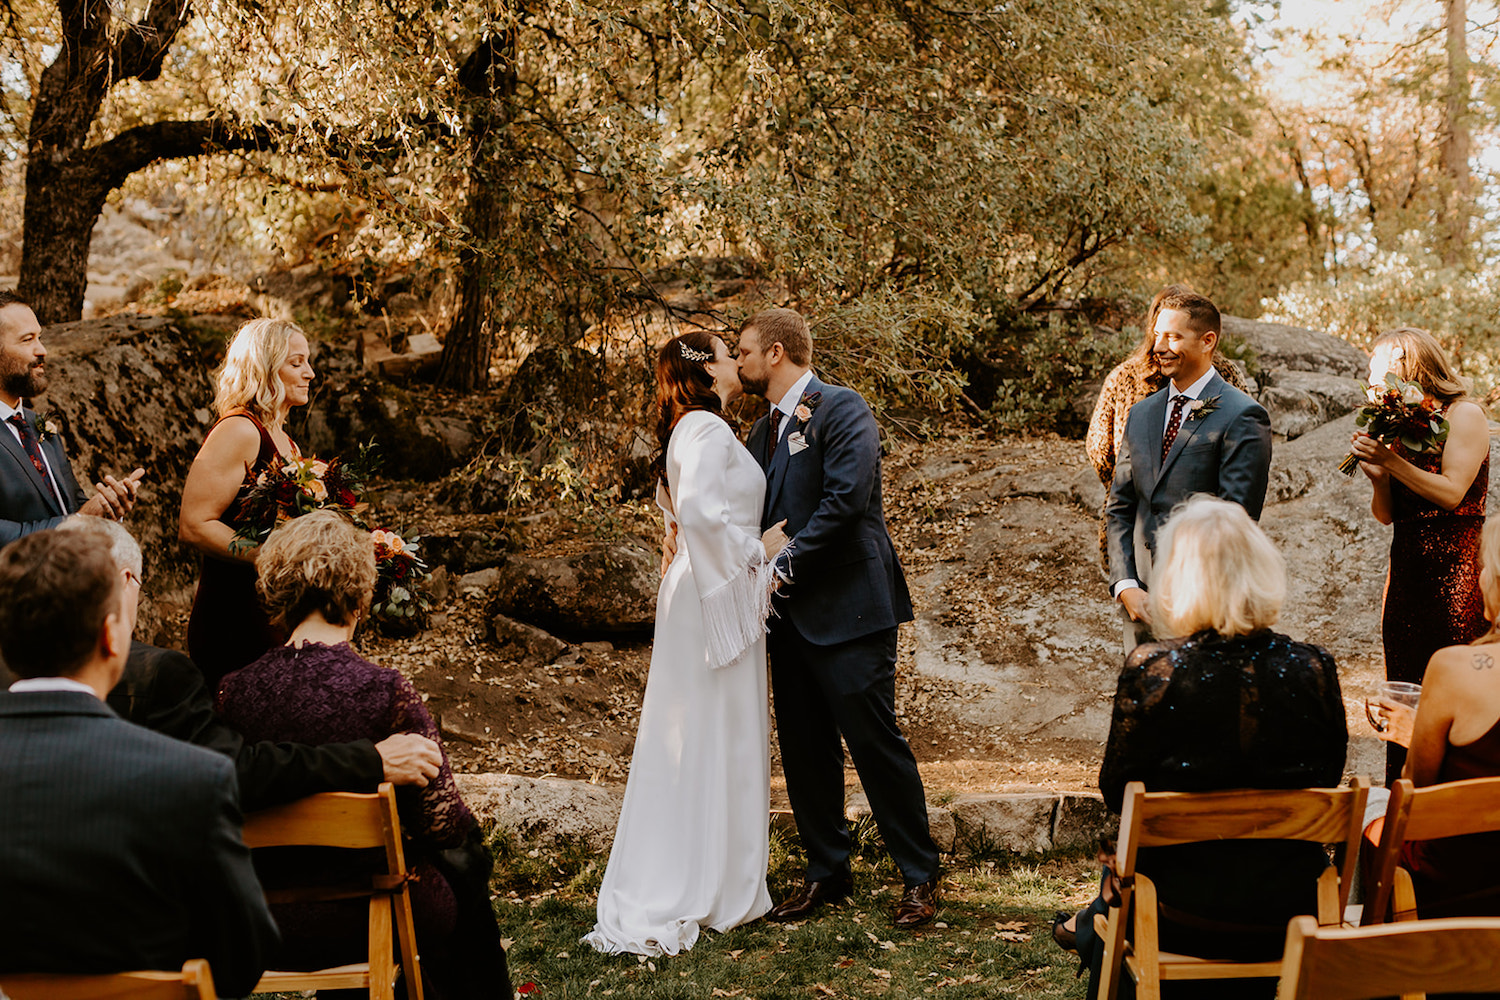 A newlywed couple kisses during their ceremony at their outdoor wedding venue in the bay area, photographed by Maya Lora Photography.